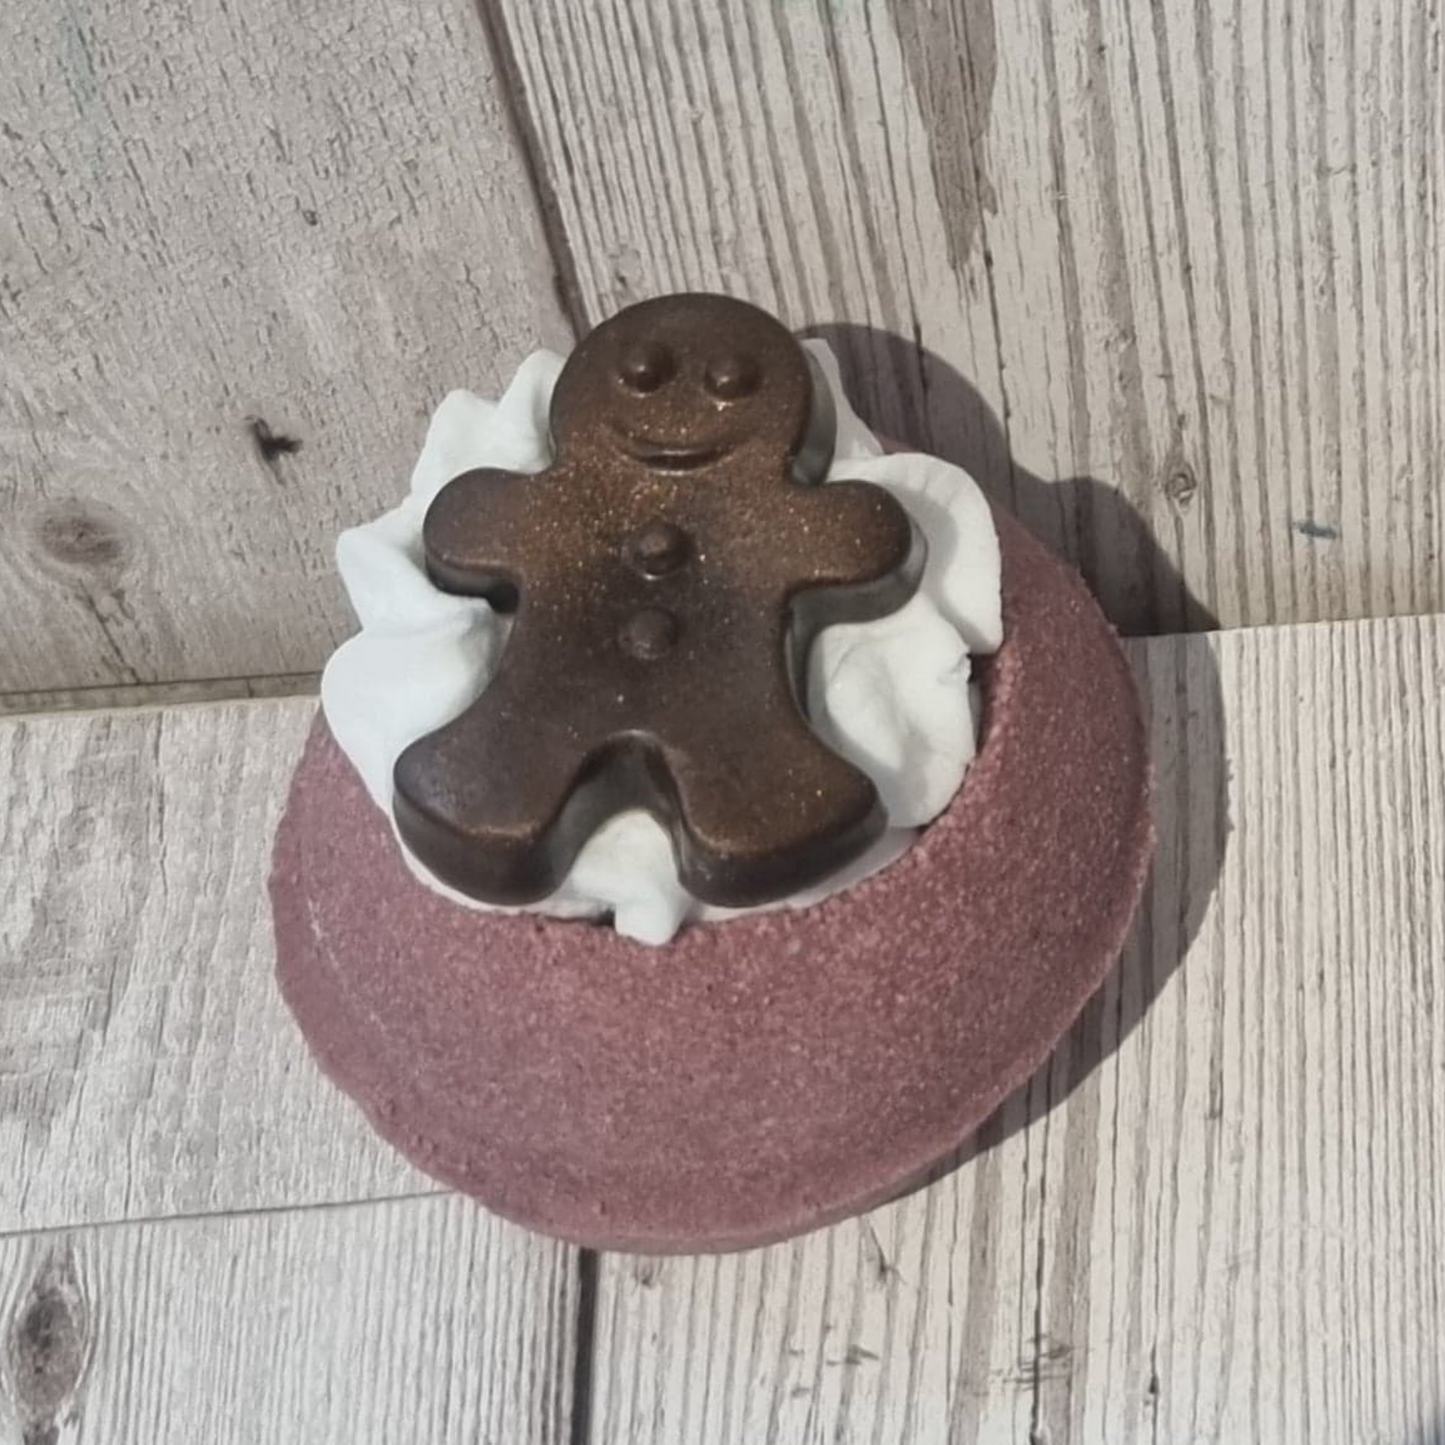 'Gingerbread' Whipped Top Bath Bomb